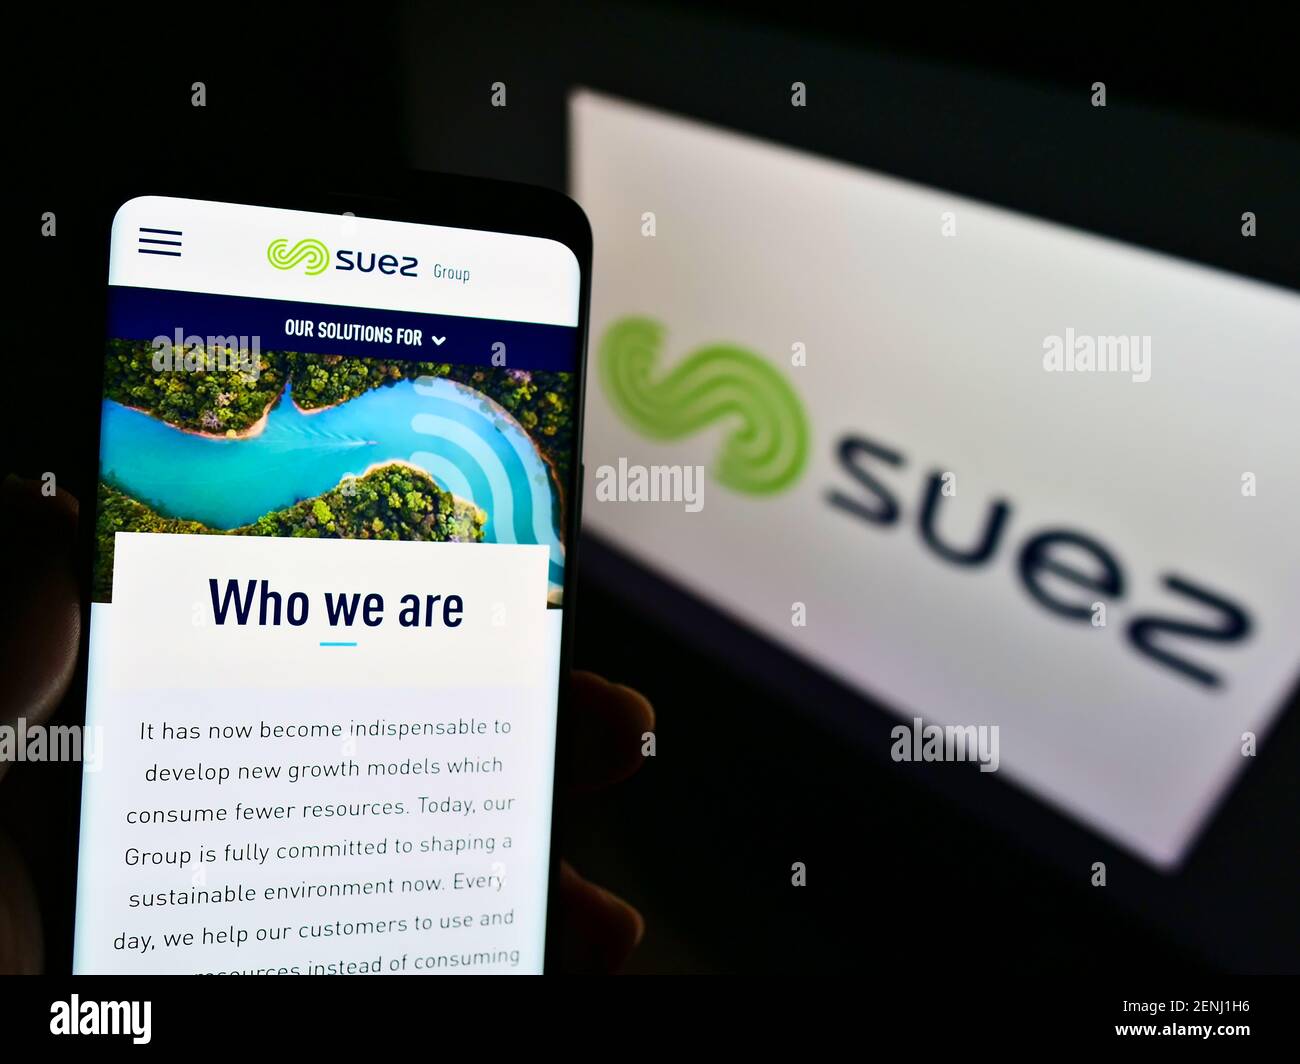 Person holding smartphone with website of French utility company Suez S.A. on screen in front of business logo. Focus on center-left phone display. Stock Photo